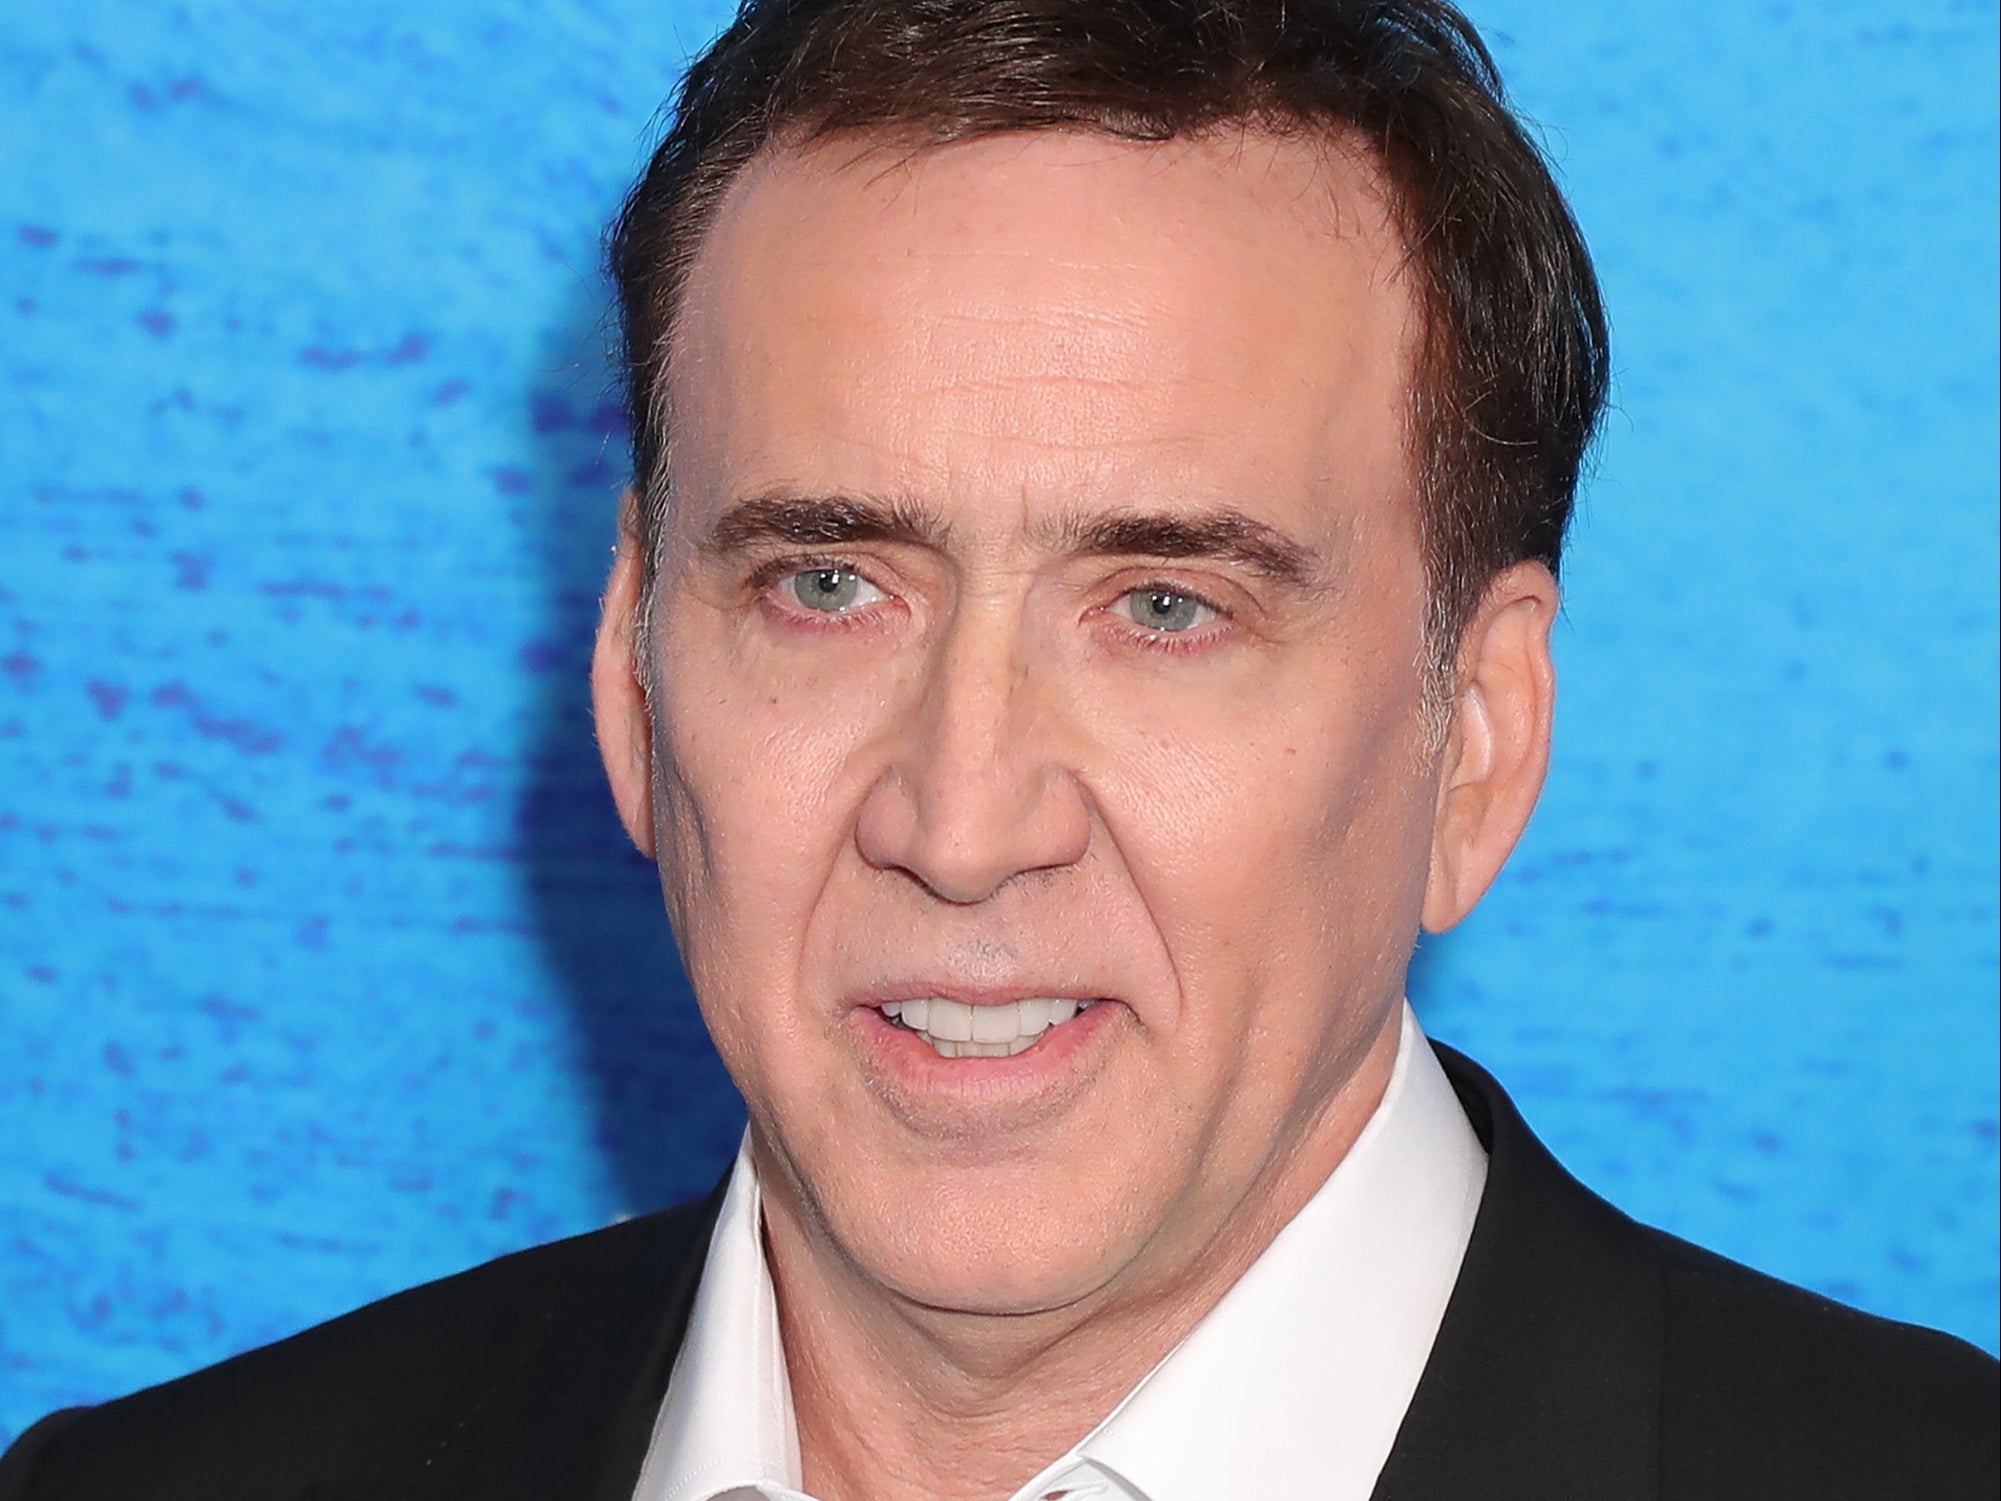 Nicolas Cage has explained why he accepted ‘crummy’ VOD movie roles